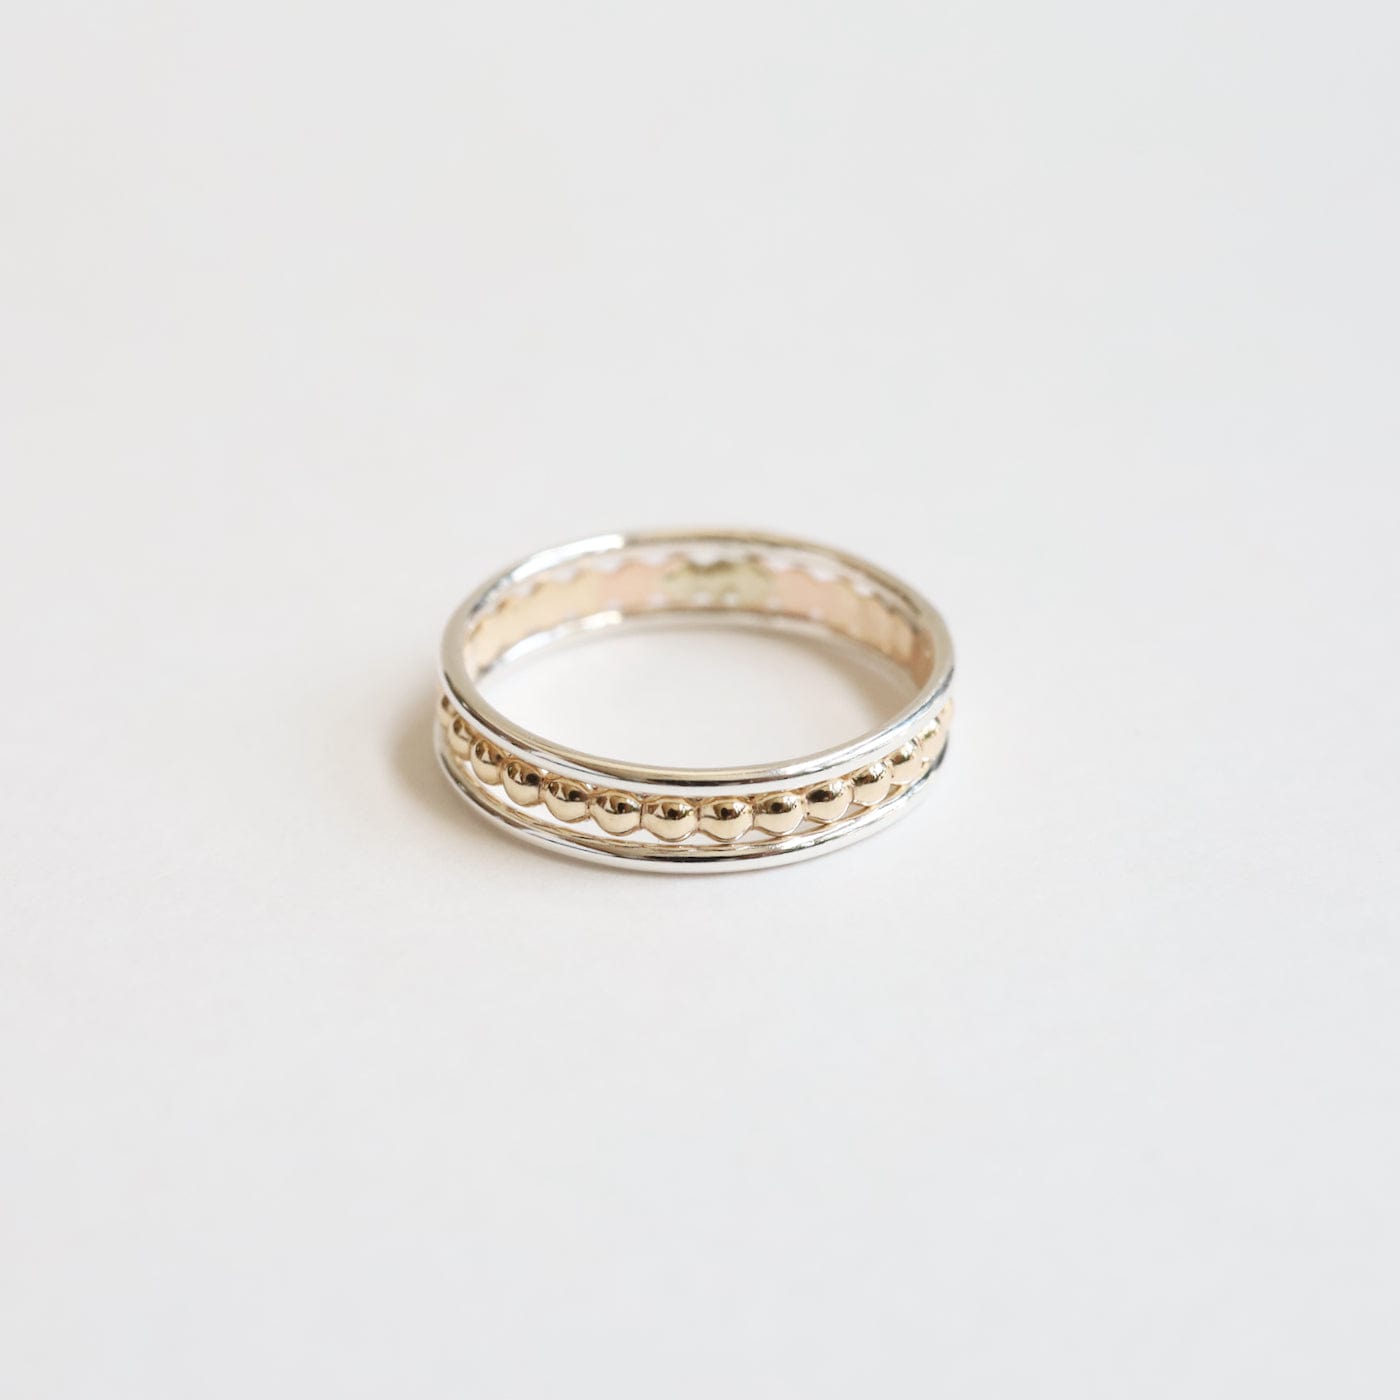 RNG 3 Band Stacked Ring - Sterling Silver with Gold Filled Round Bead Band